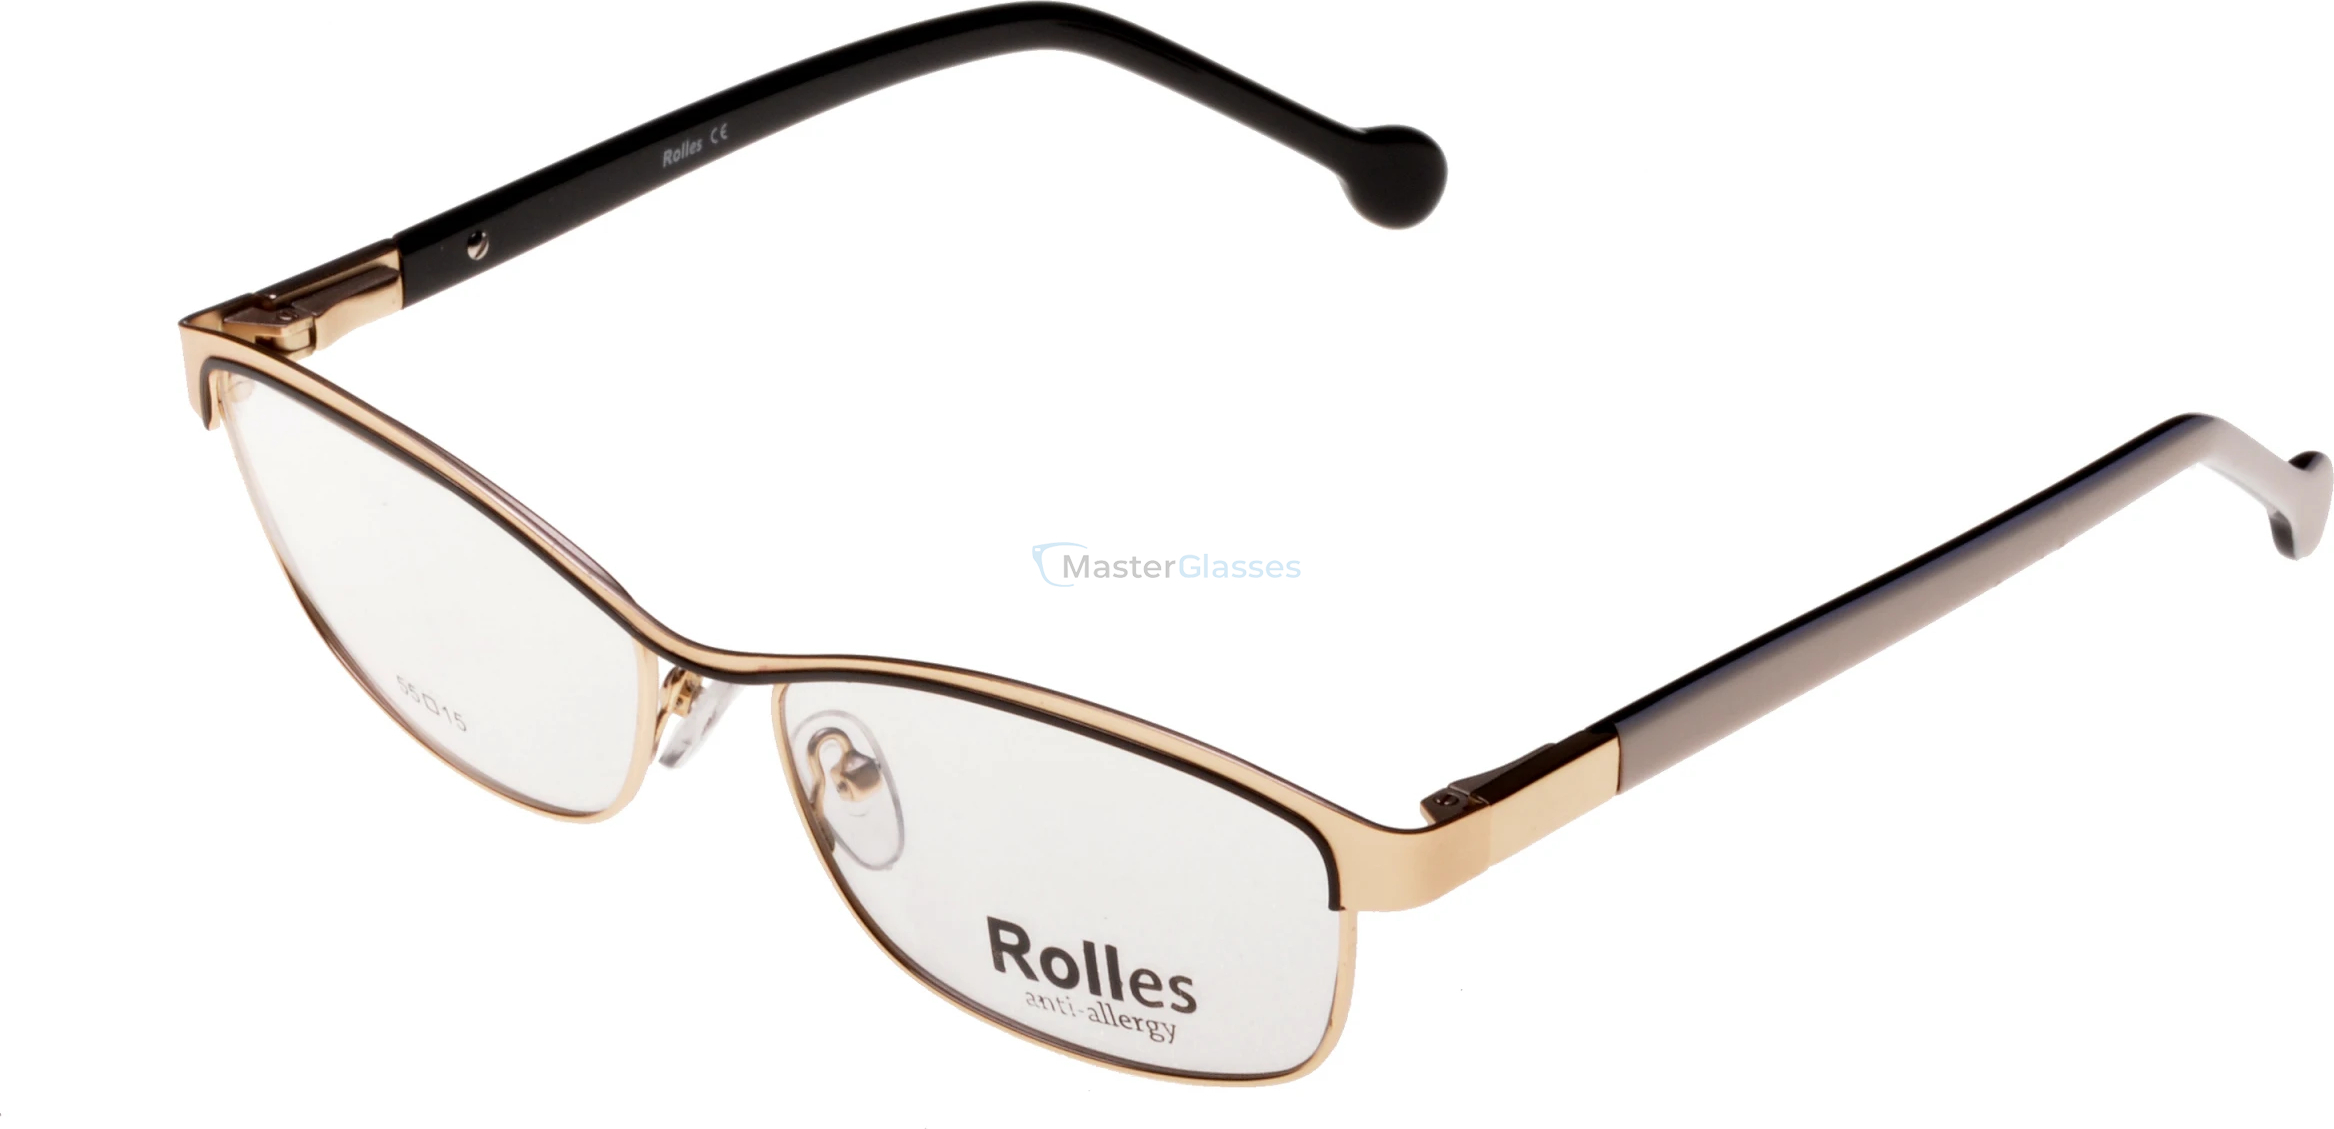  Rolles 469 01